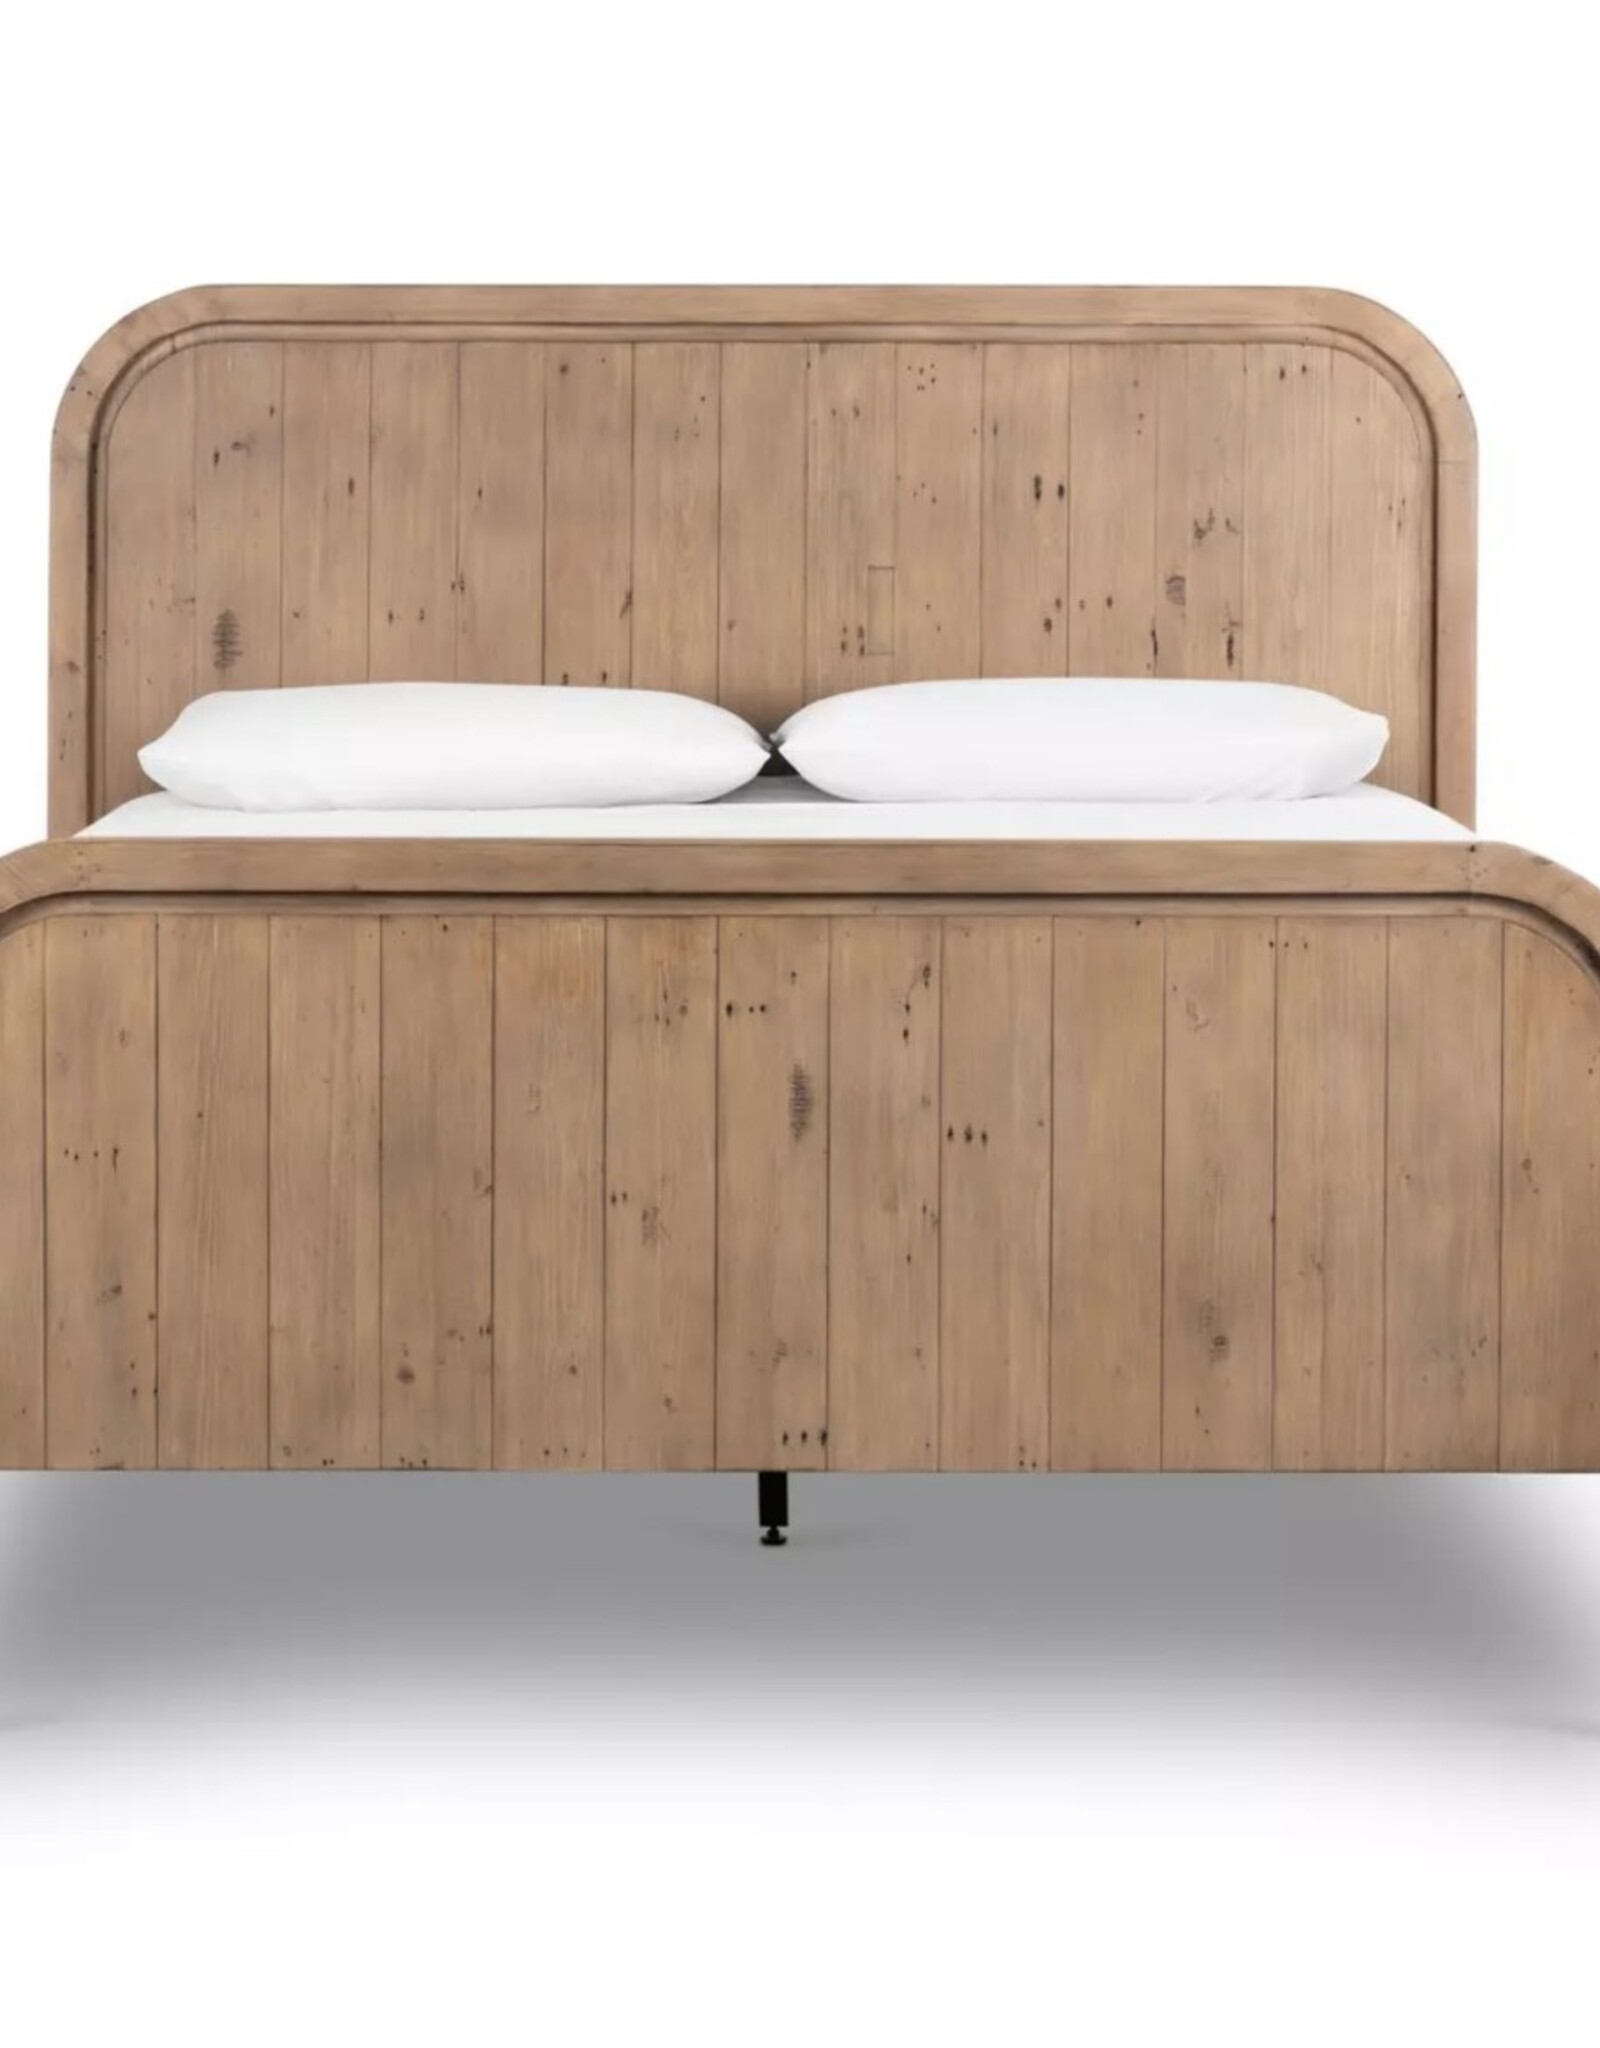 Everson Queen Bed